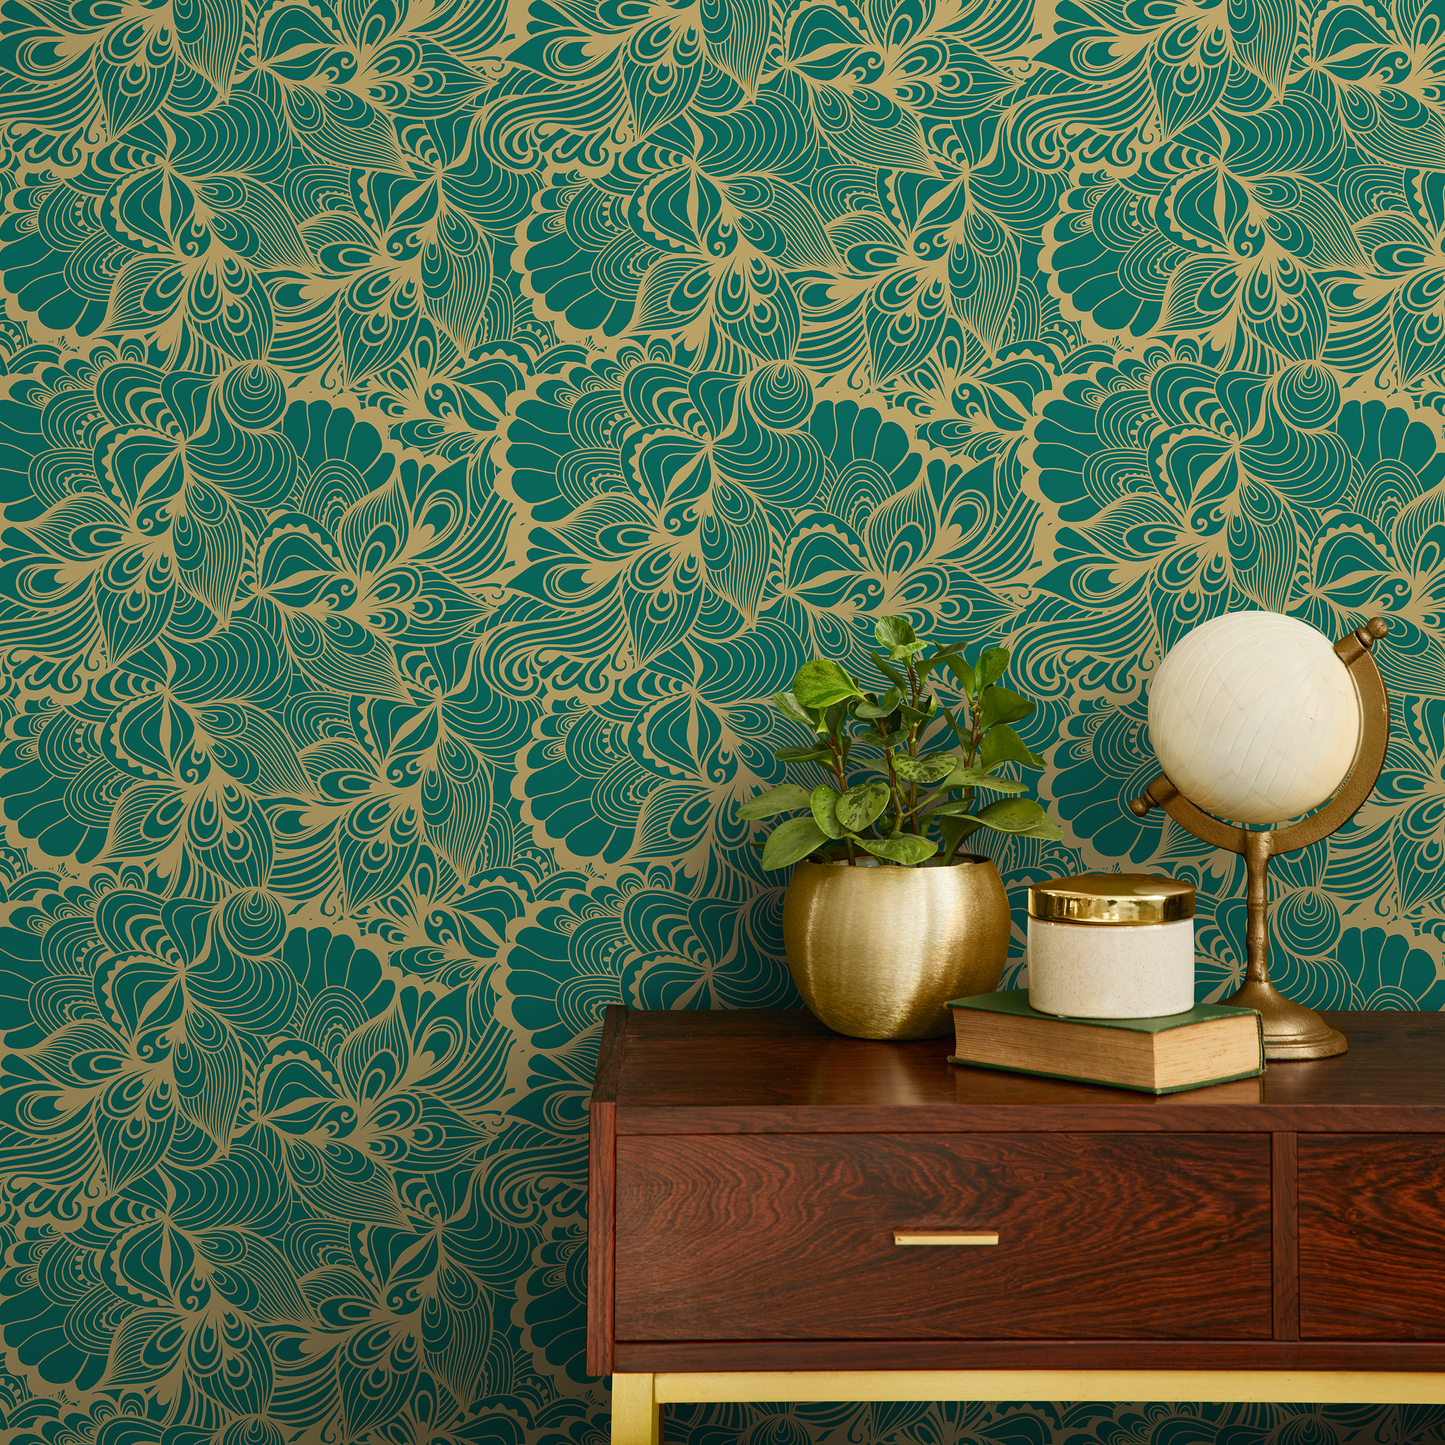 Green Abstract Leaf Wallpaper Peel and Stick and Traditional Wallpaper - B561